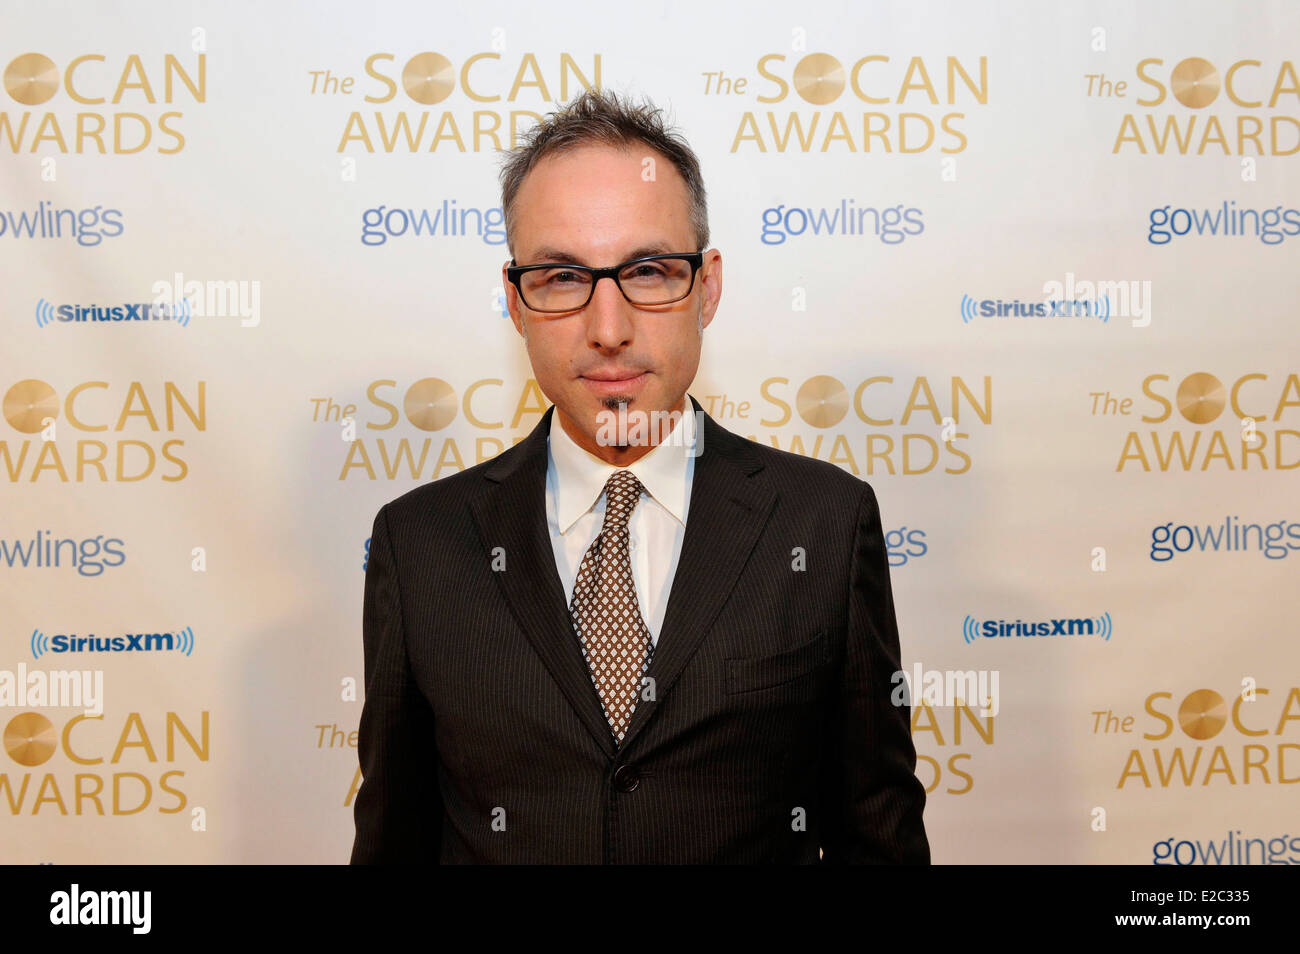 Ian Lefeuvre poses for photo at the 25th SOCAN Awards (Society of Composers, Authors and Music Publishers of Canada). Stock Photo